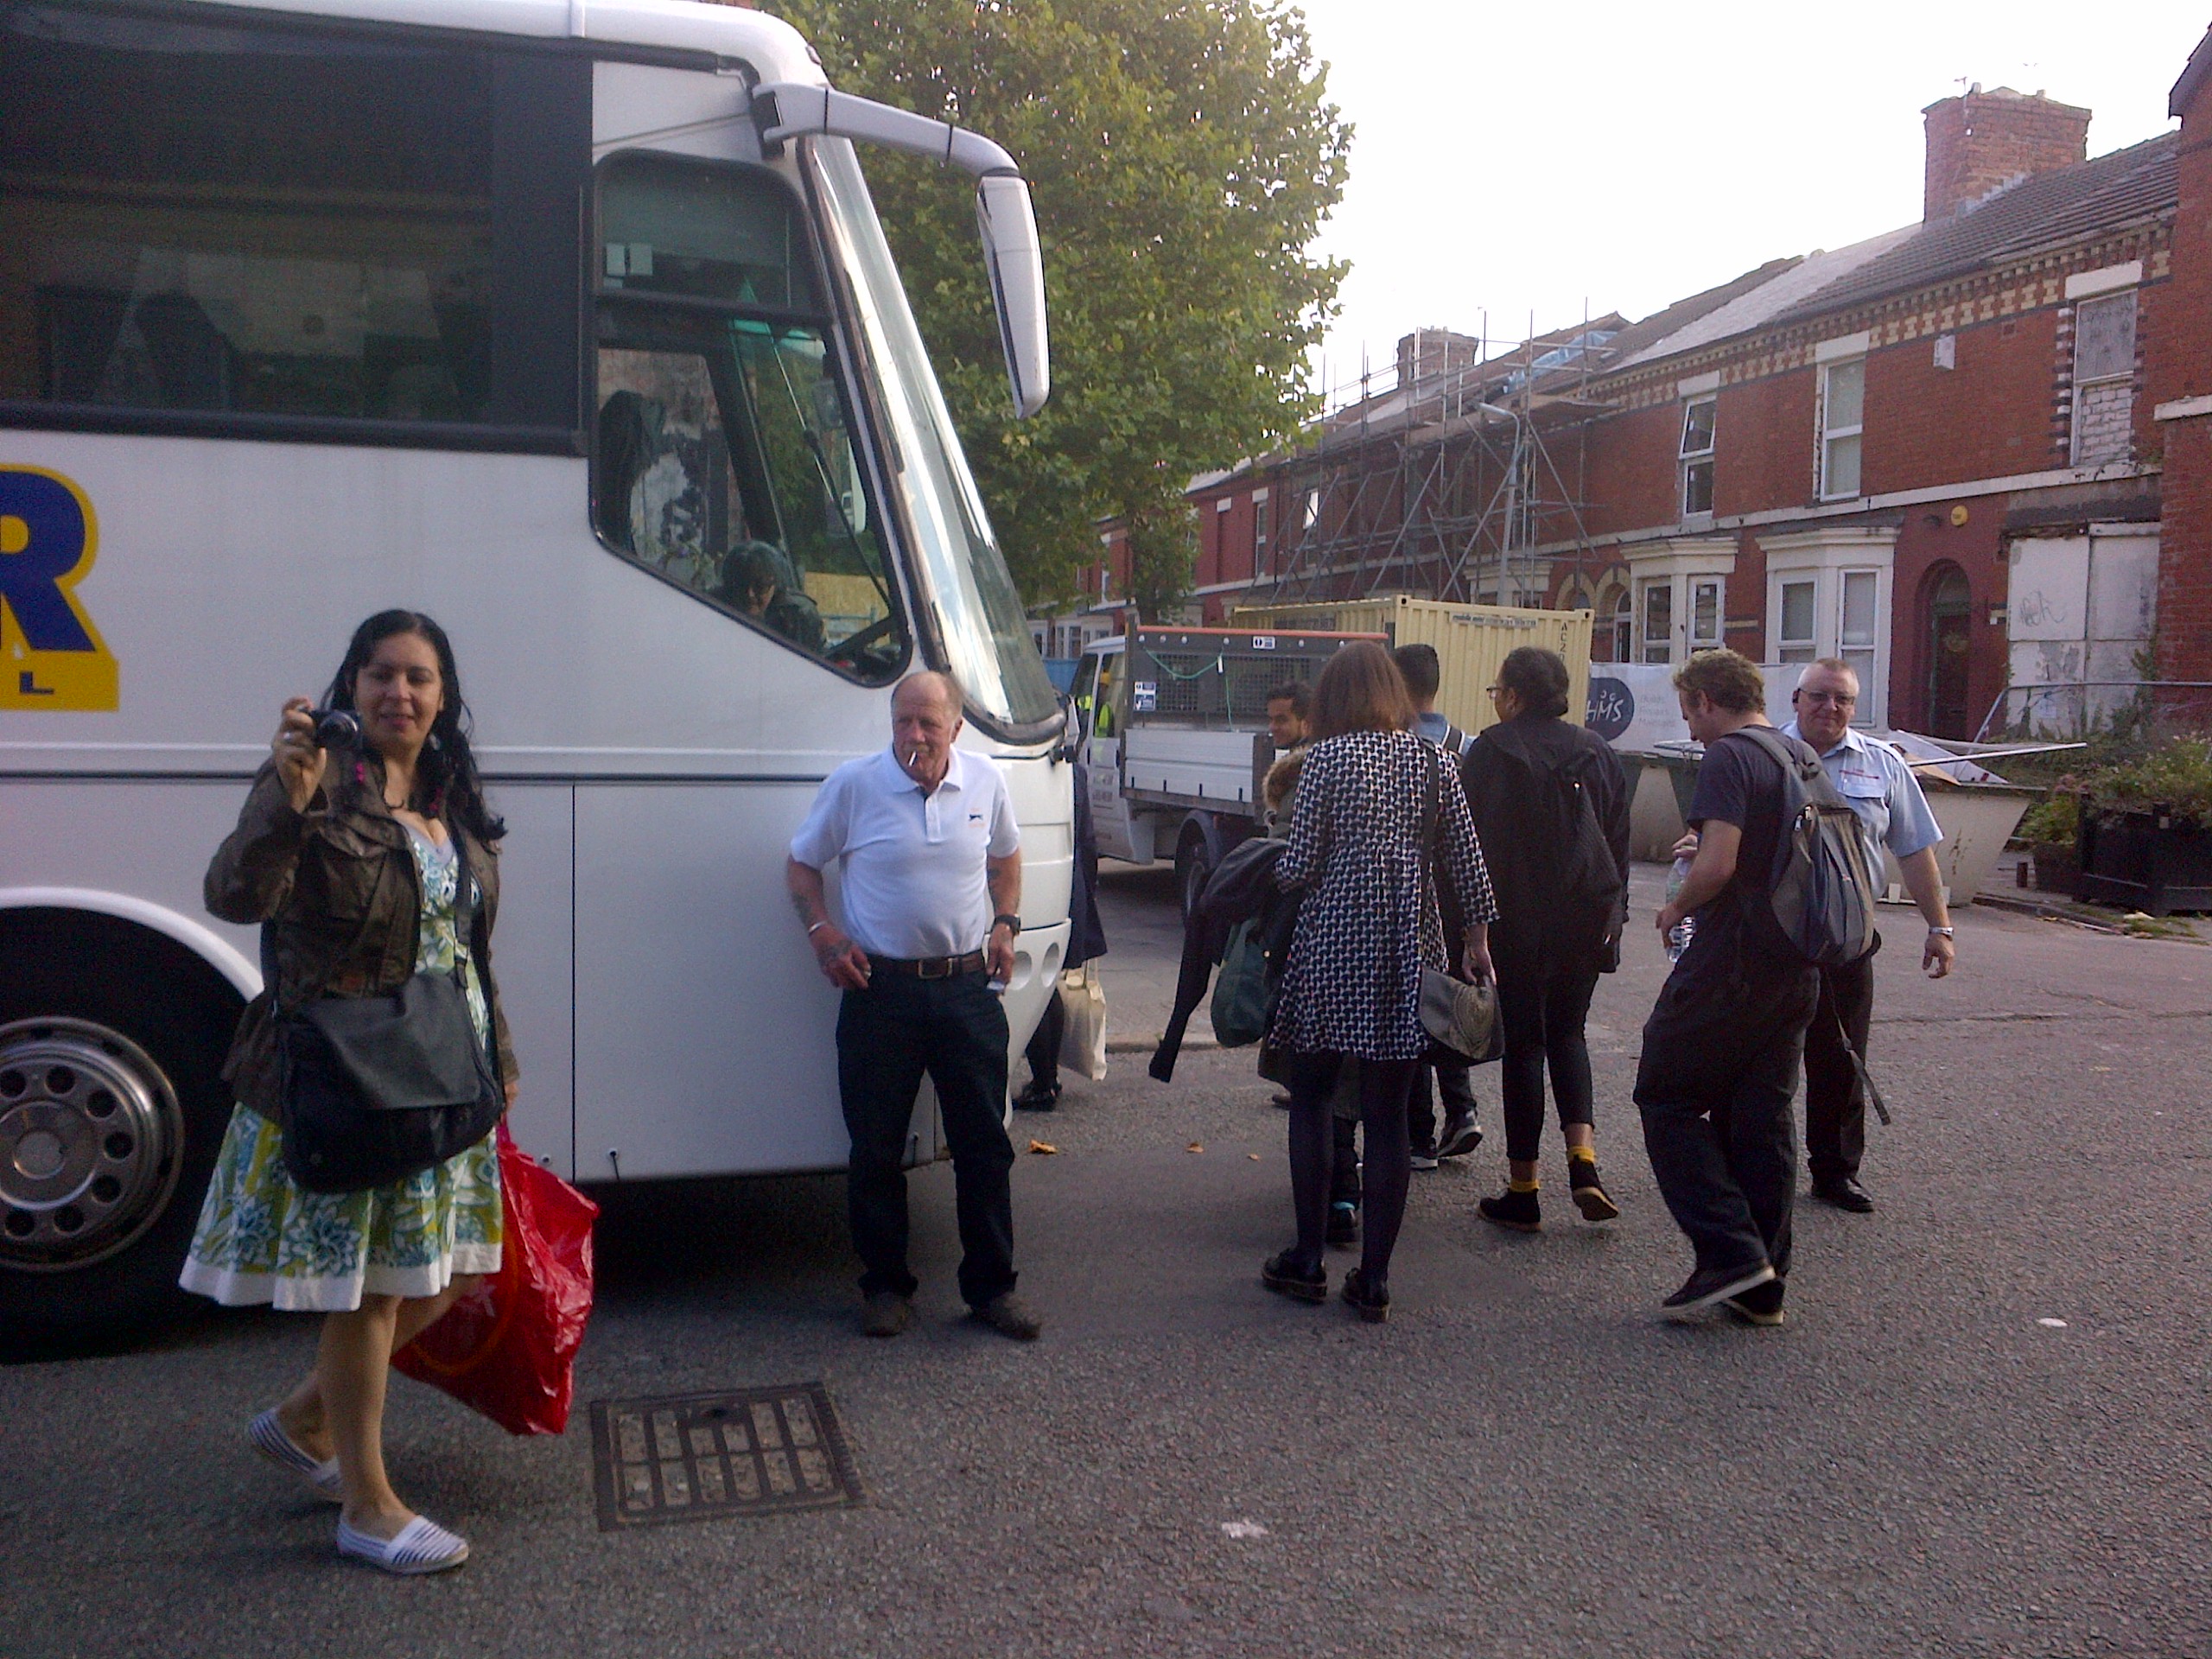 Granby Community Land Trust residents and supporters prepare to board the coach to the Turner Prize 2015 party